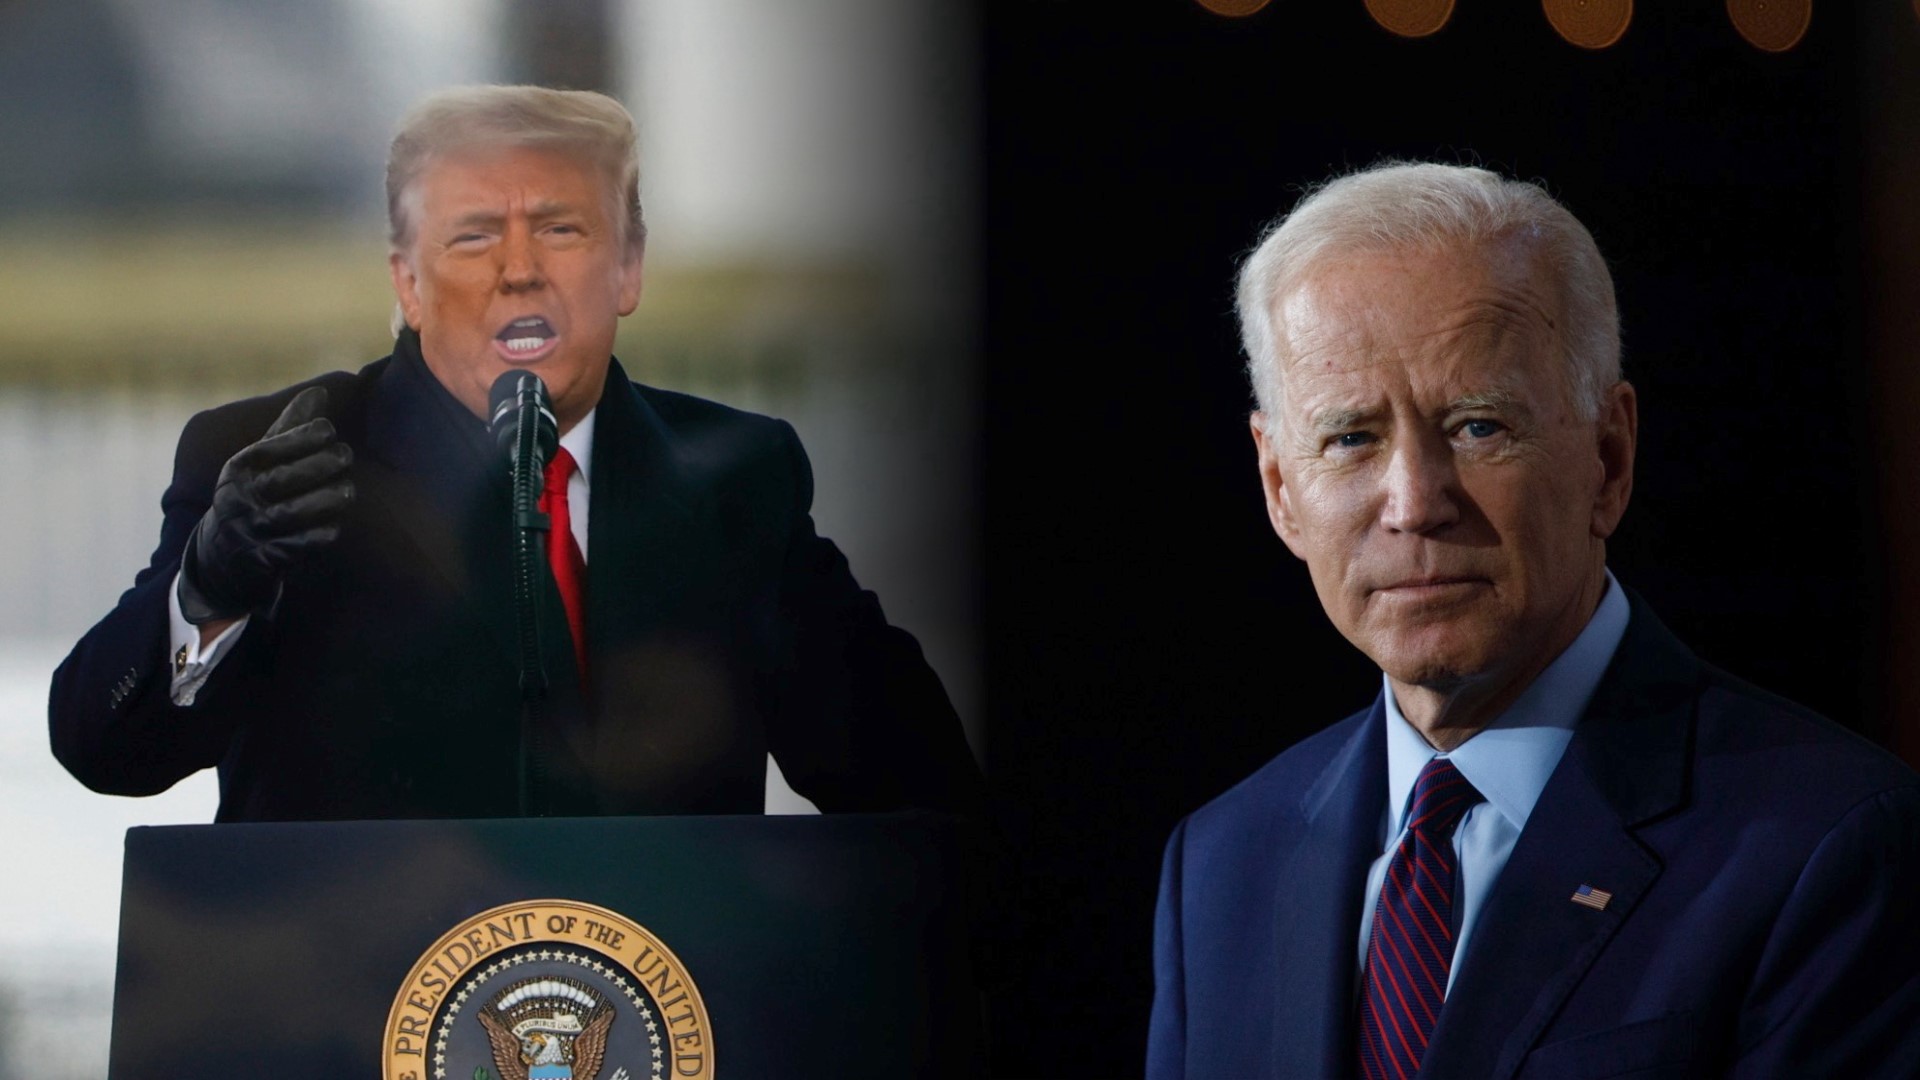 It appears President Biden and President Trump agree on one thing, how to handle China.